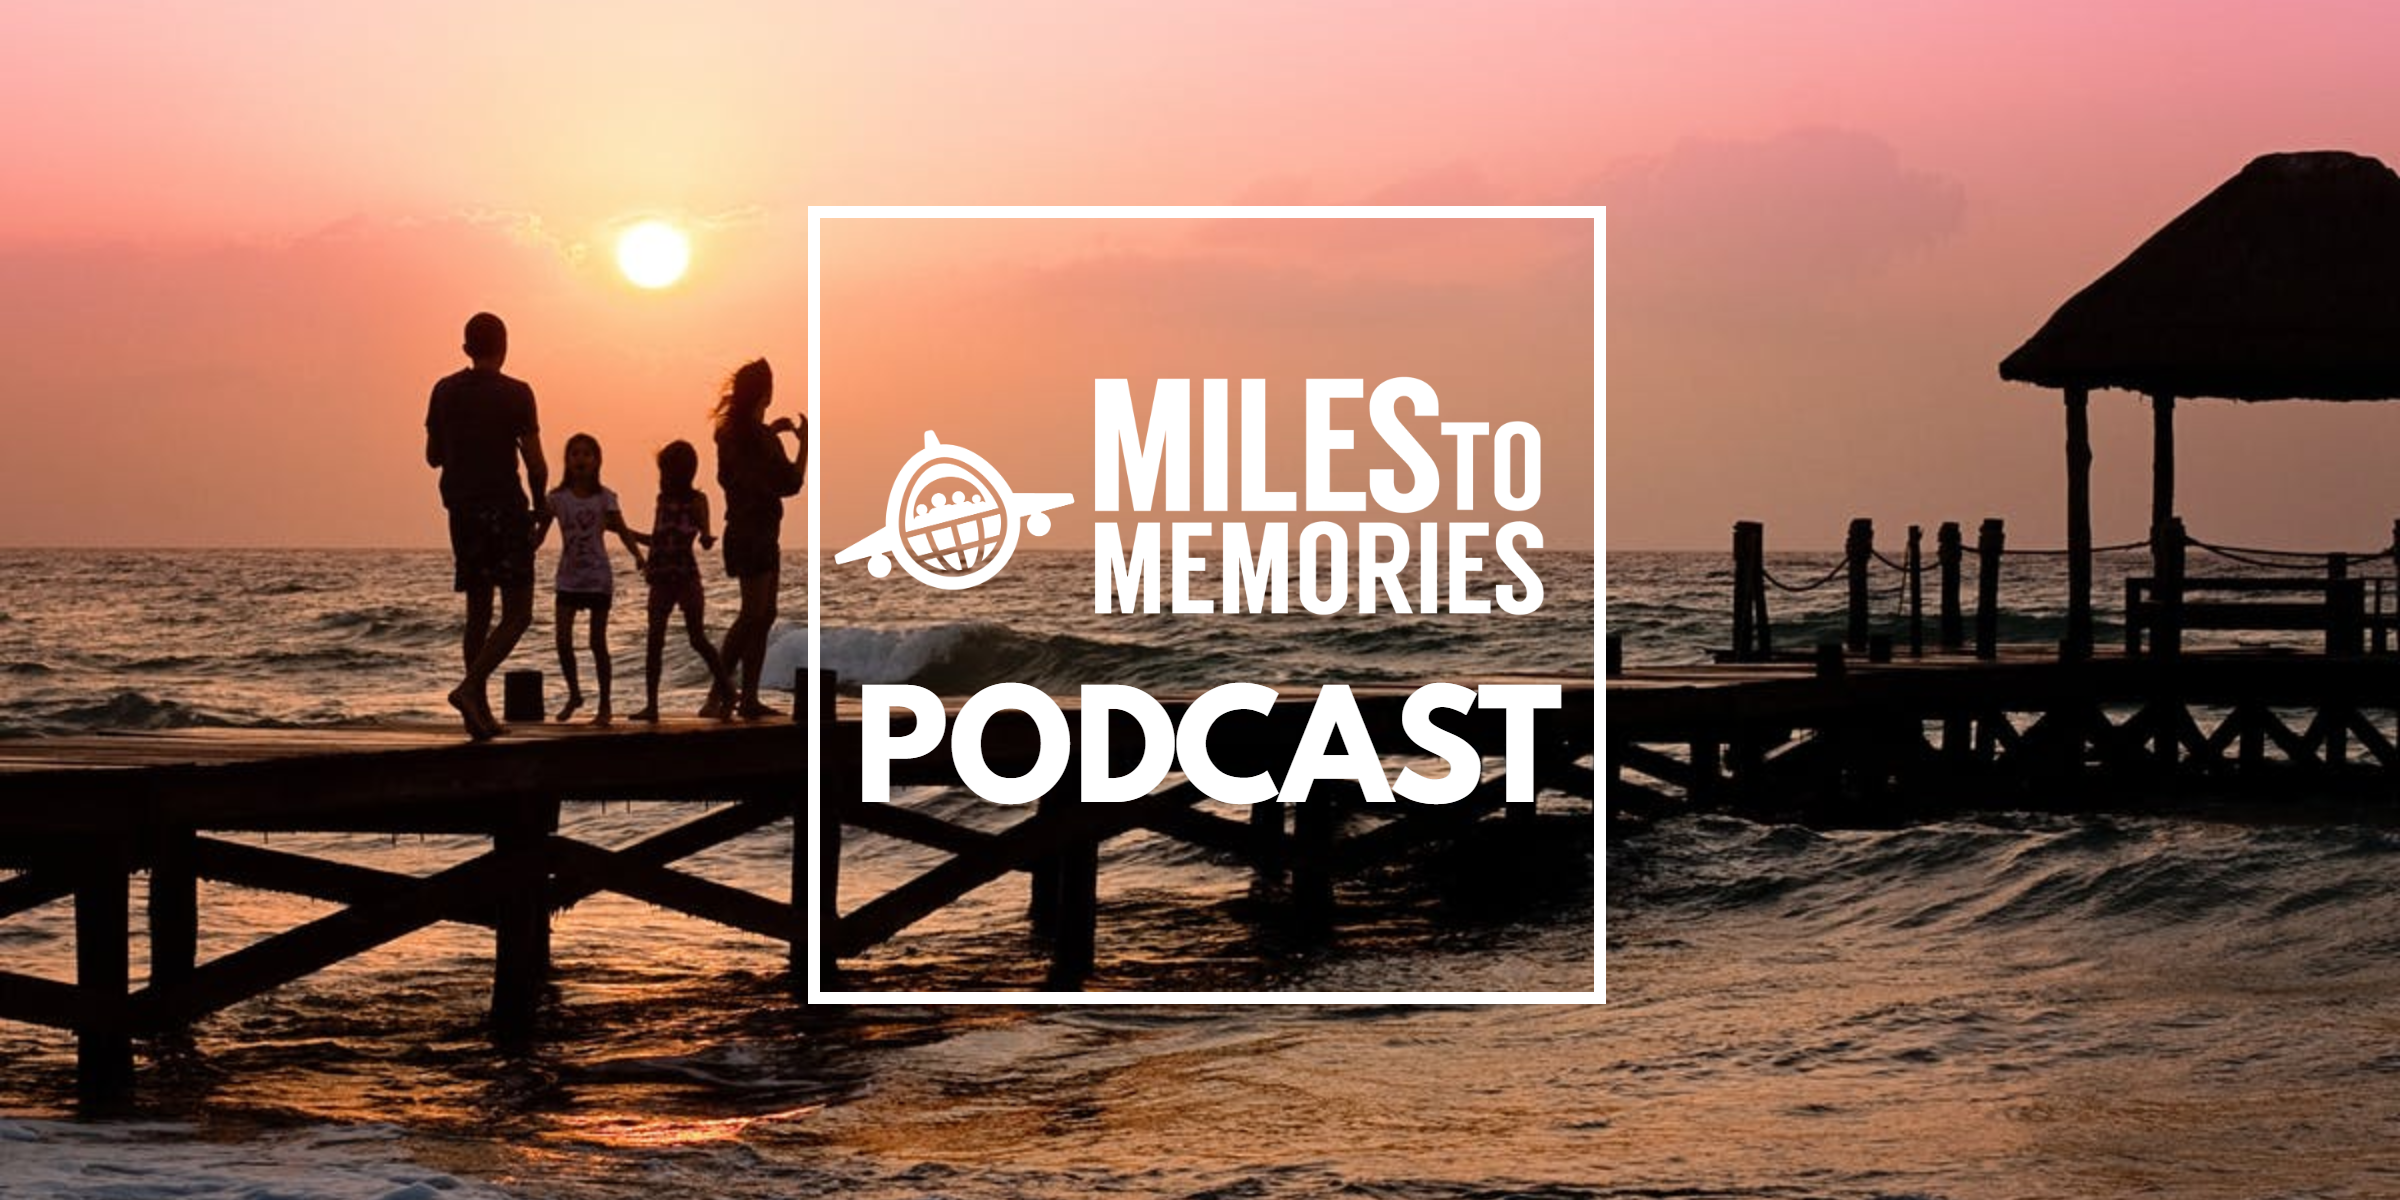 Miles to Memories Podcast Episode 8